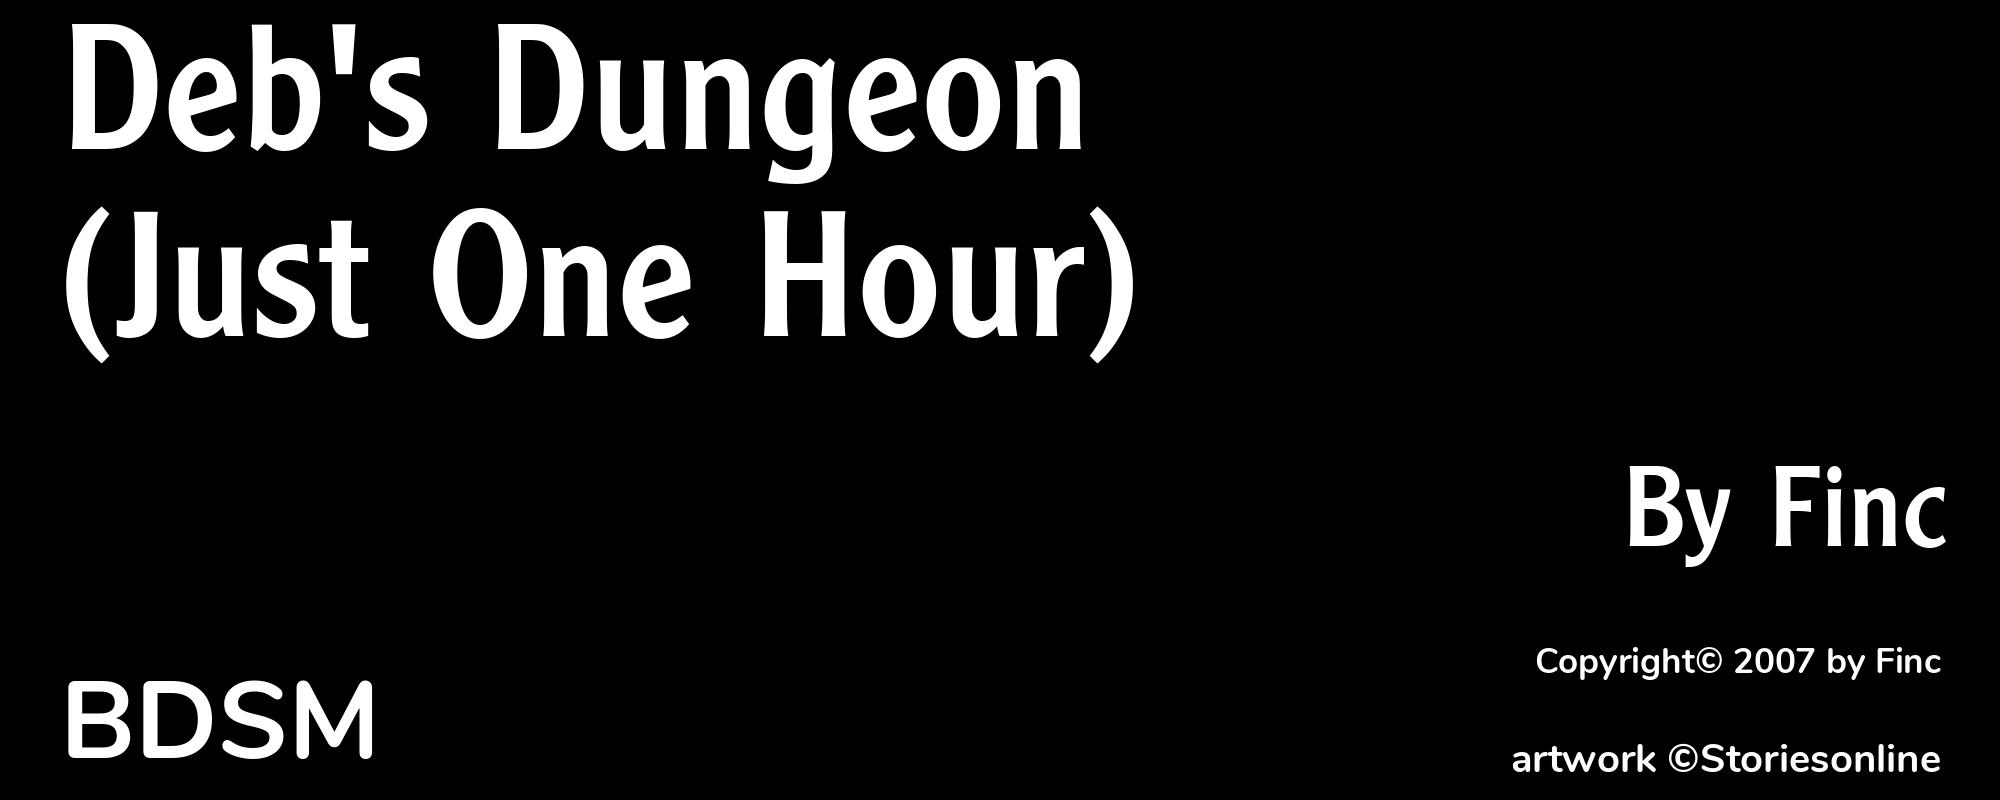 Deb's Dungeon (Just One Hour) - Cover